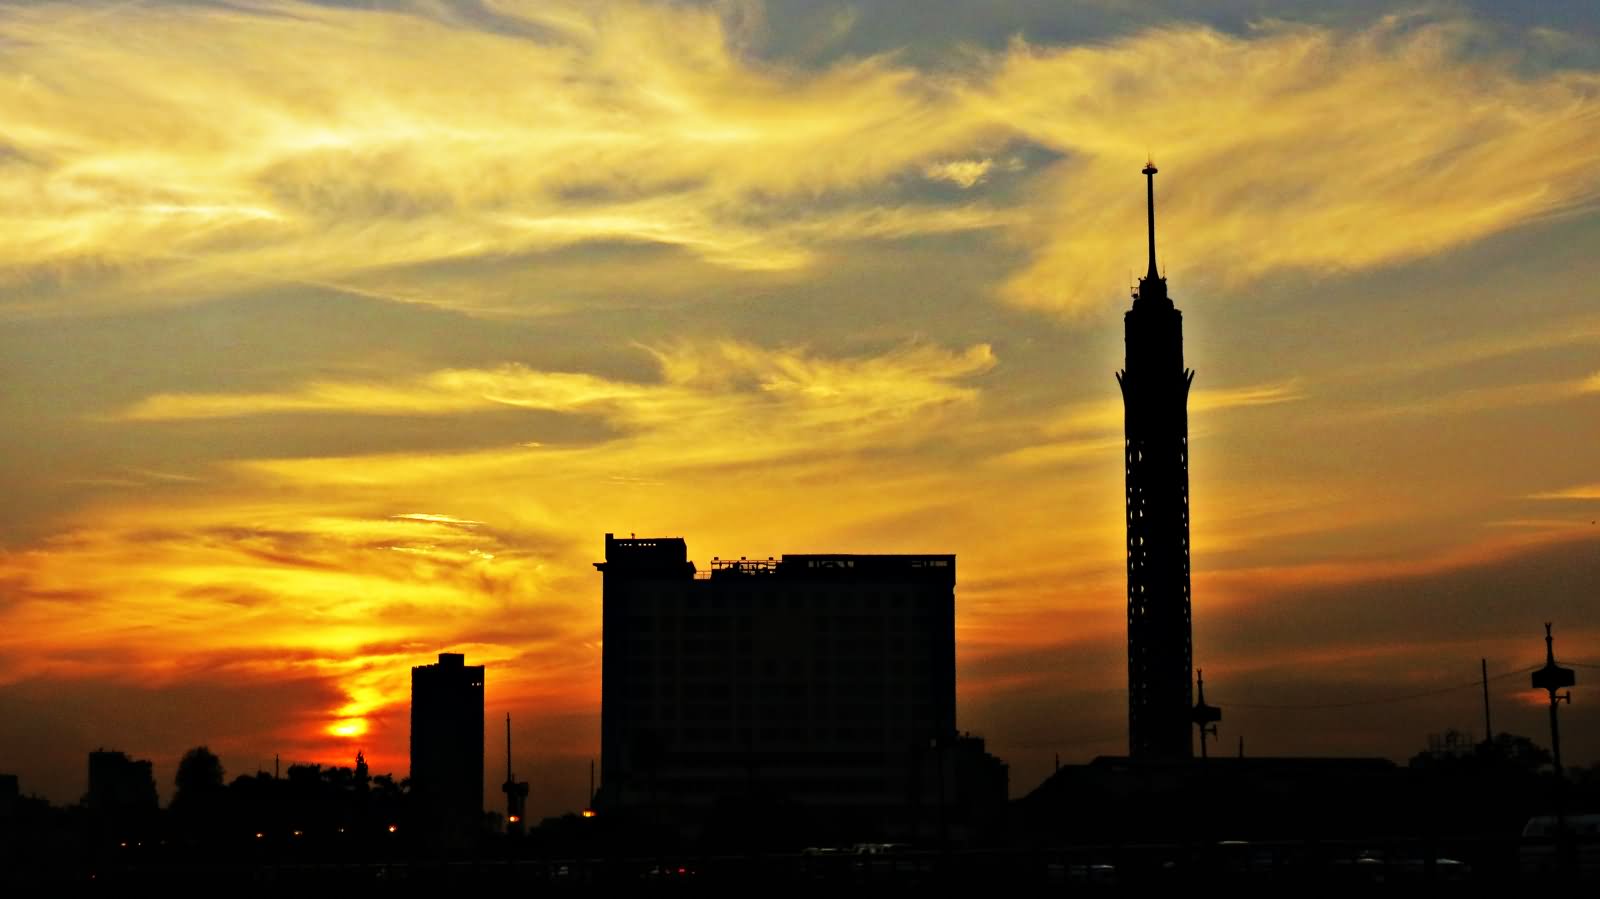 11 Most Beautiful Sunset View Images Of Cairo Tower